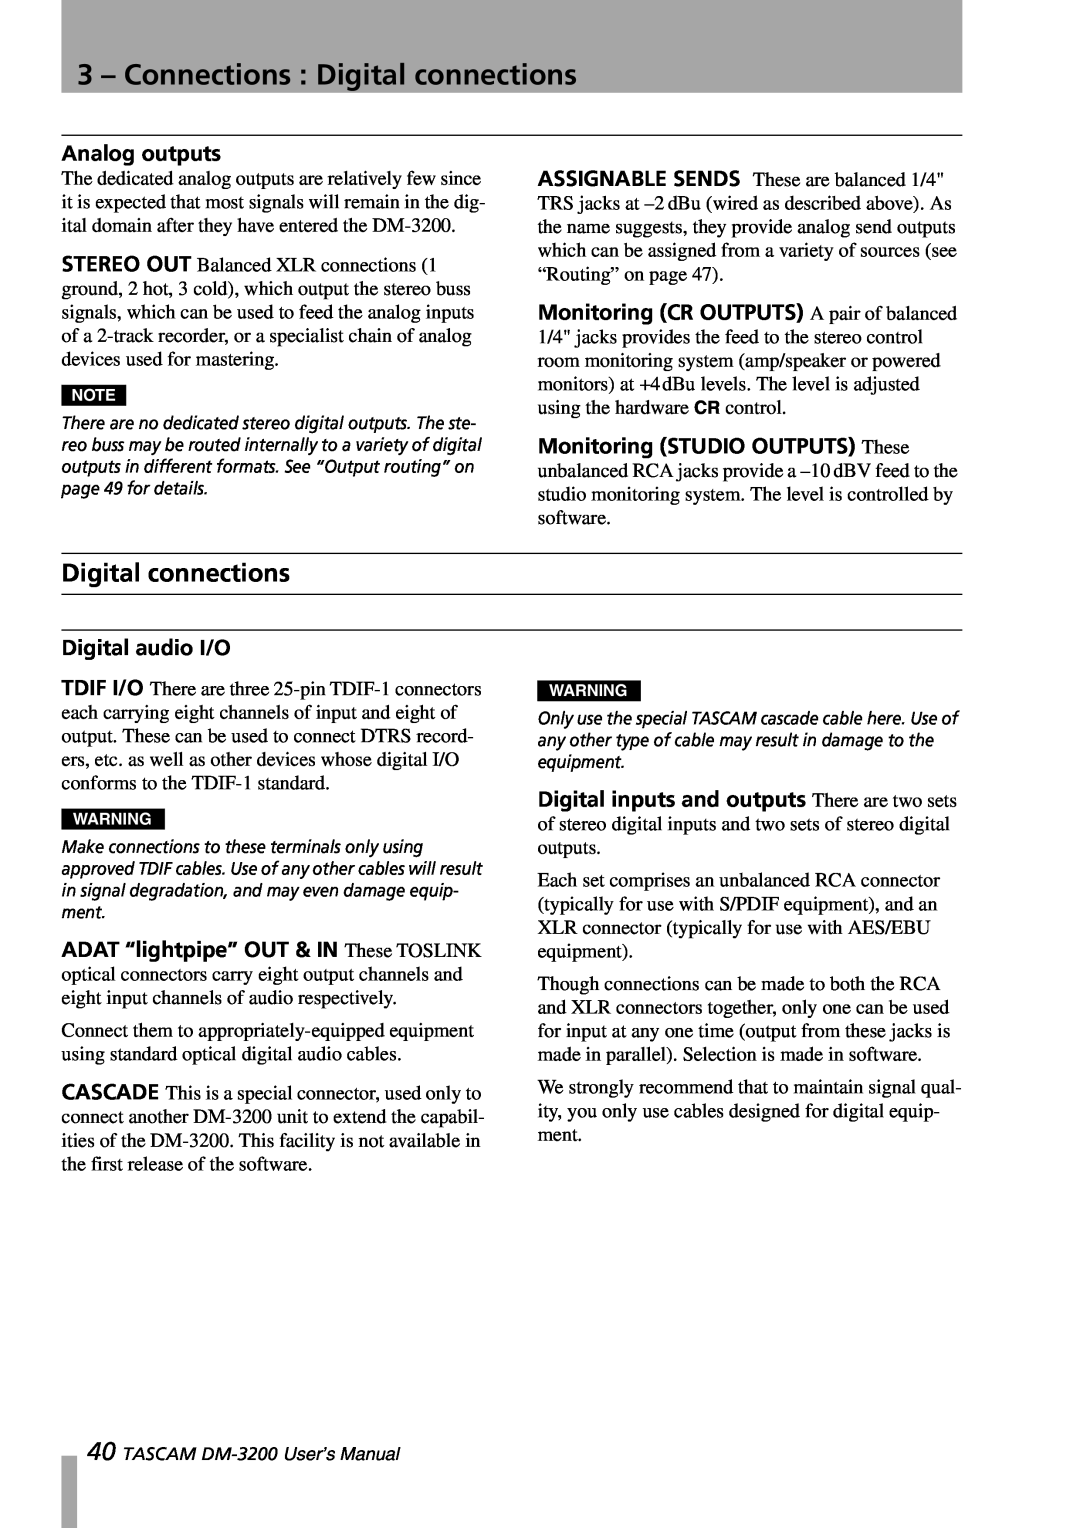 Tascam DM-3200 owner manual 3 – Connections : Digital connections, Analog outputs, Digital audio I/O 